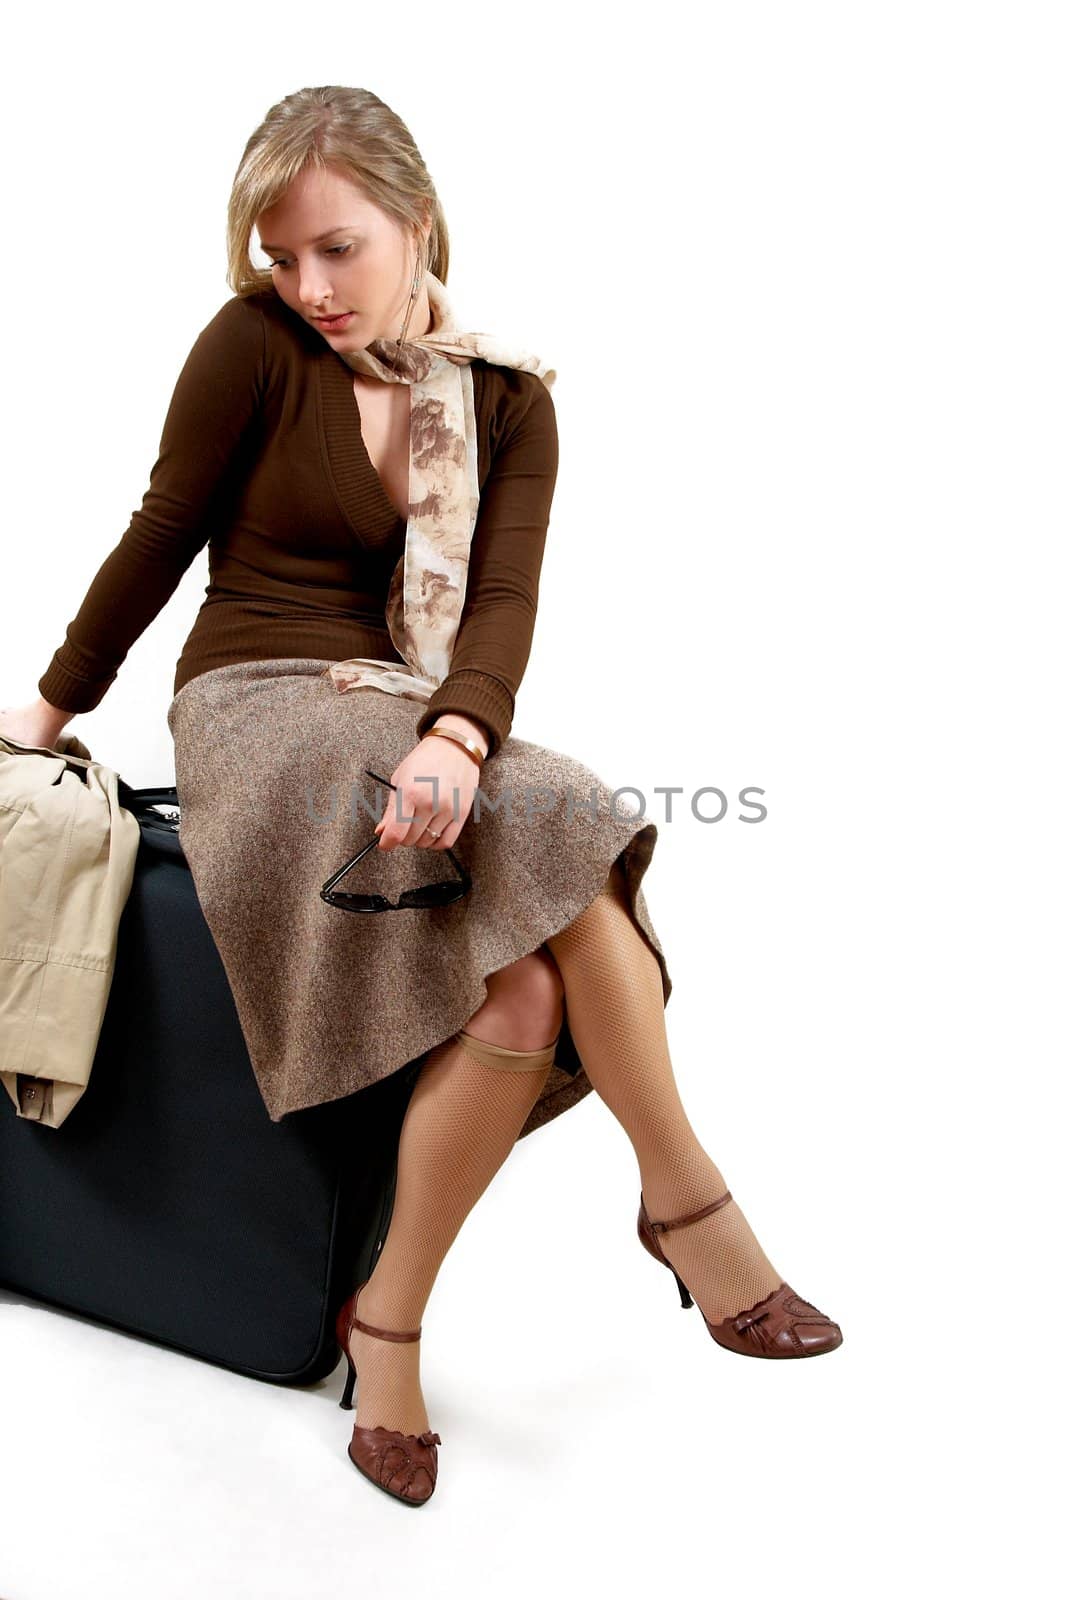 beauty woman with huge bag is siting, separate on white